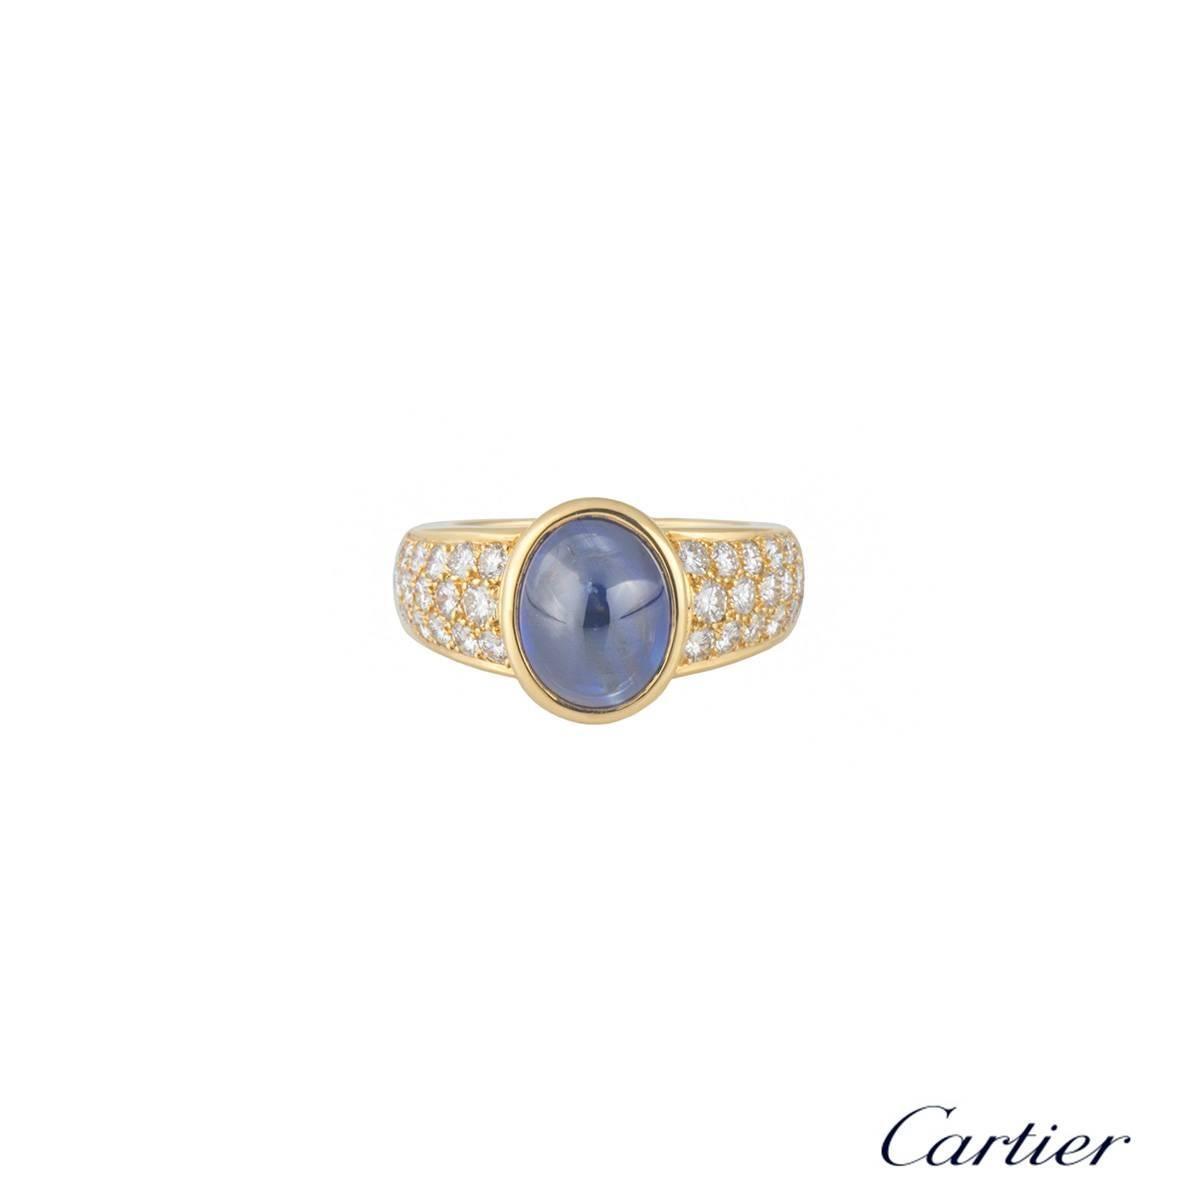 A beautiful 18k yellow gold diamond and sapphire Cartier dress ring. The ring comprises of an oval cabochon cut sapphire in a rubover setting set to the centre with a weight of approximately 3.85ct, with a dark blue hue throughout. Complementing the